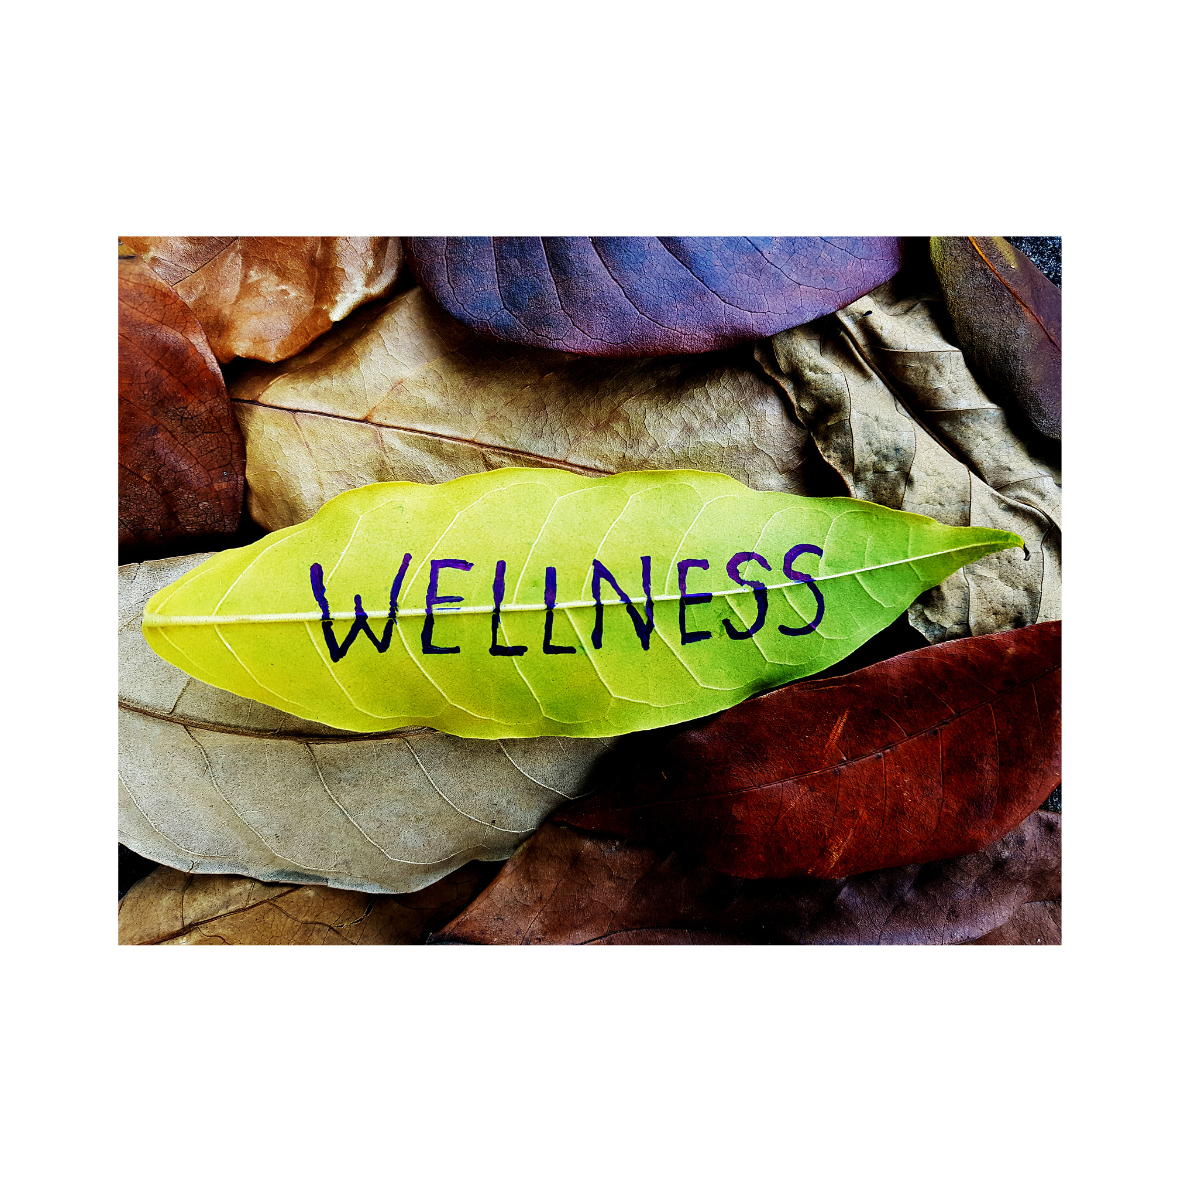 August is National Wellness Month!